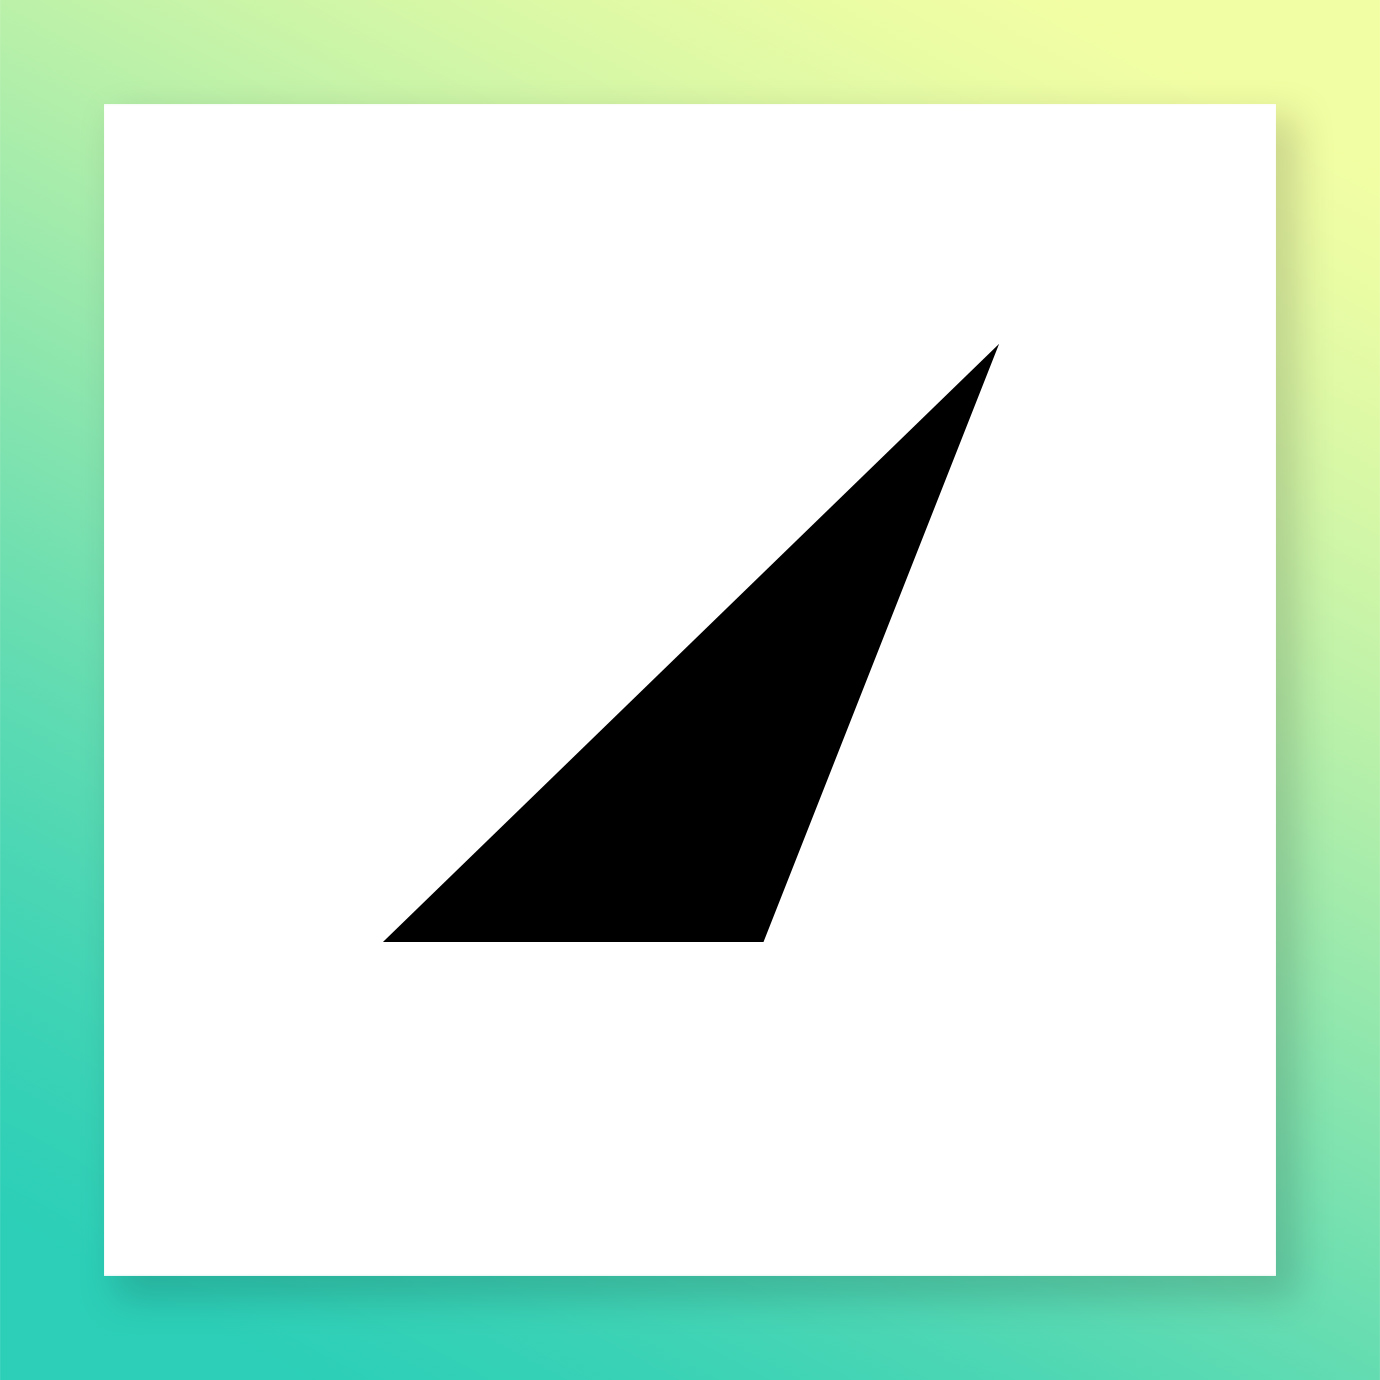 abstract run icon black on white with gradient border